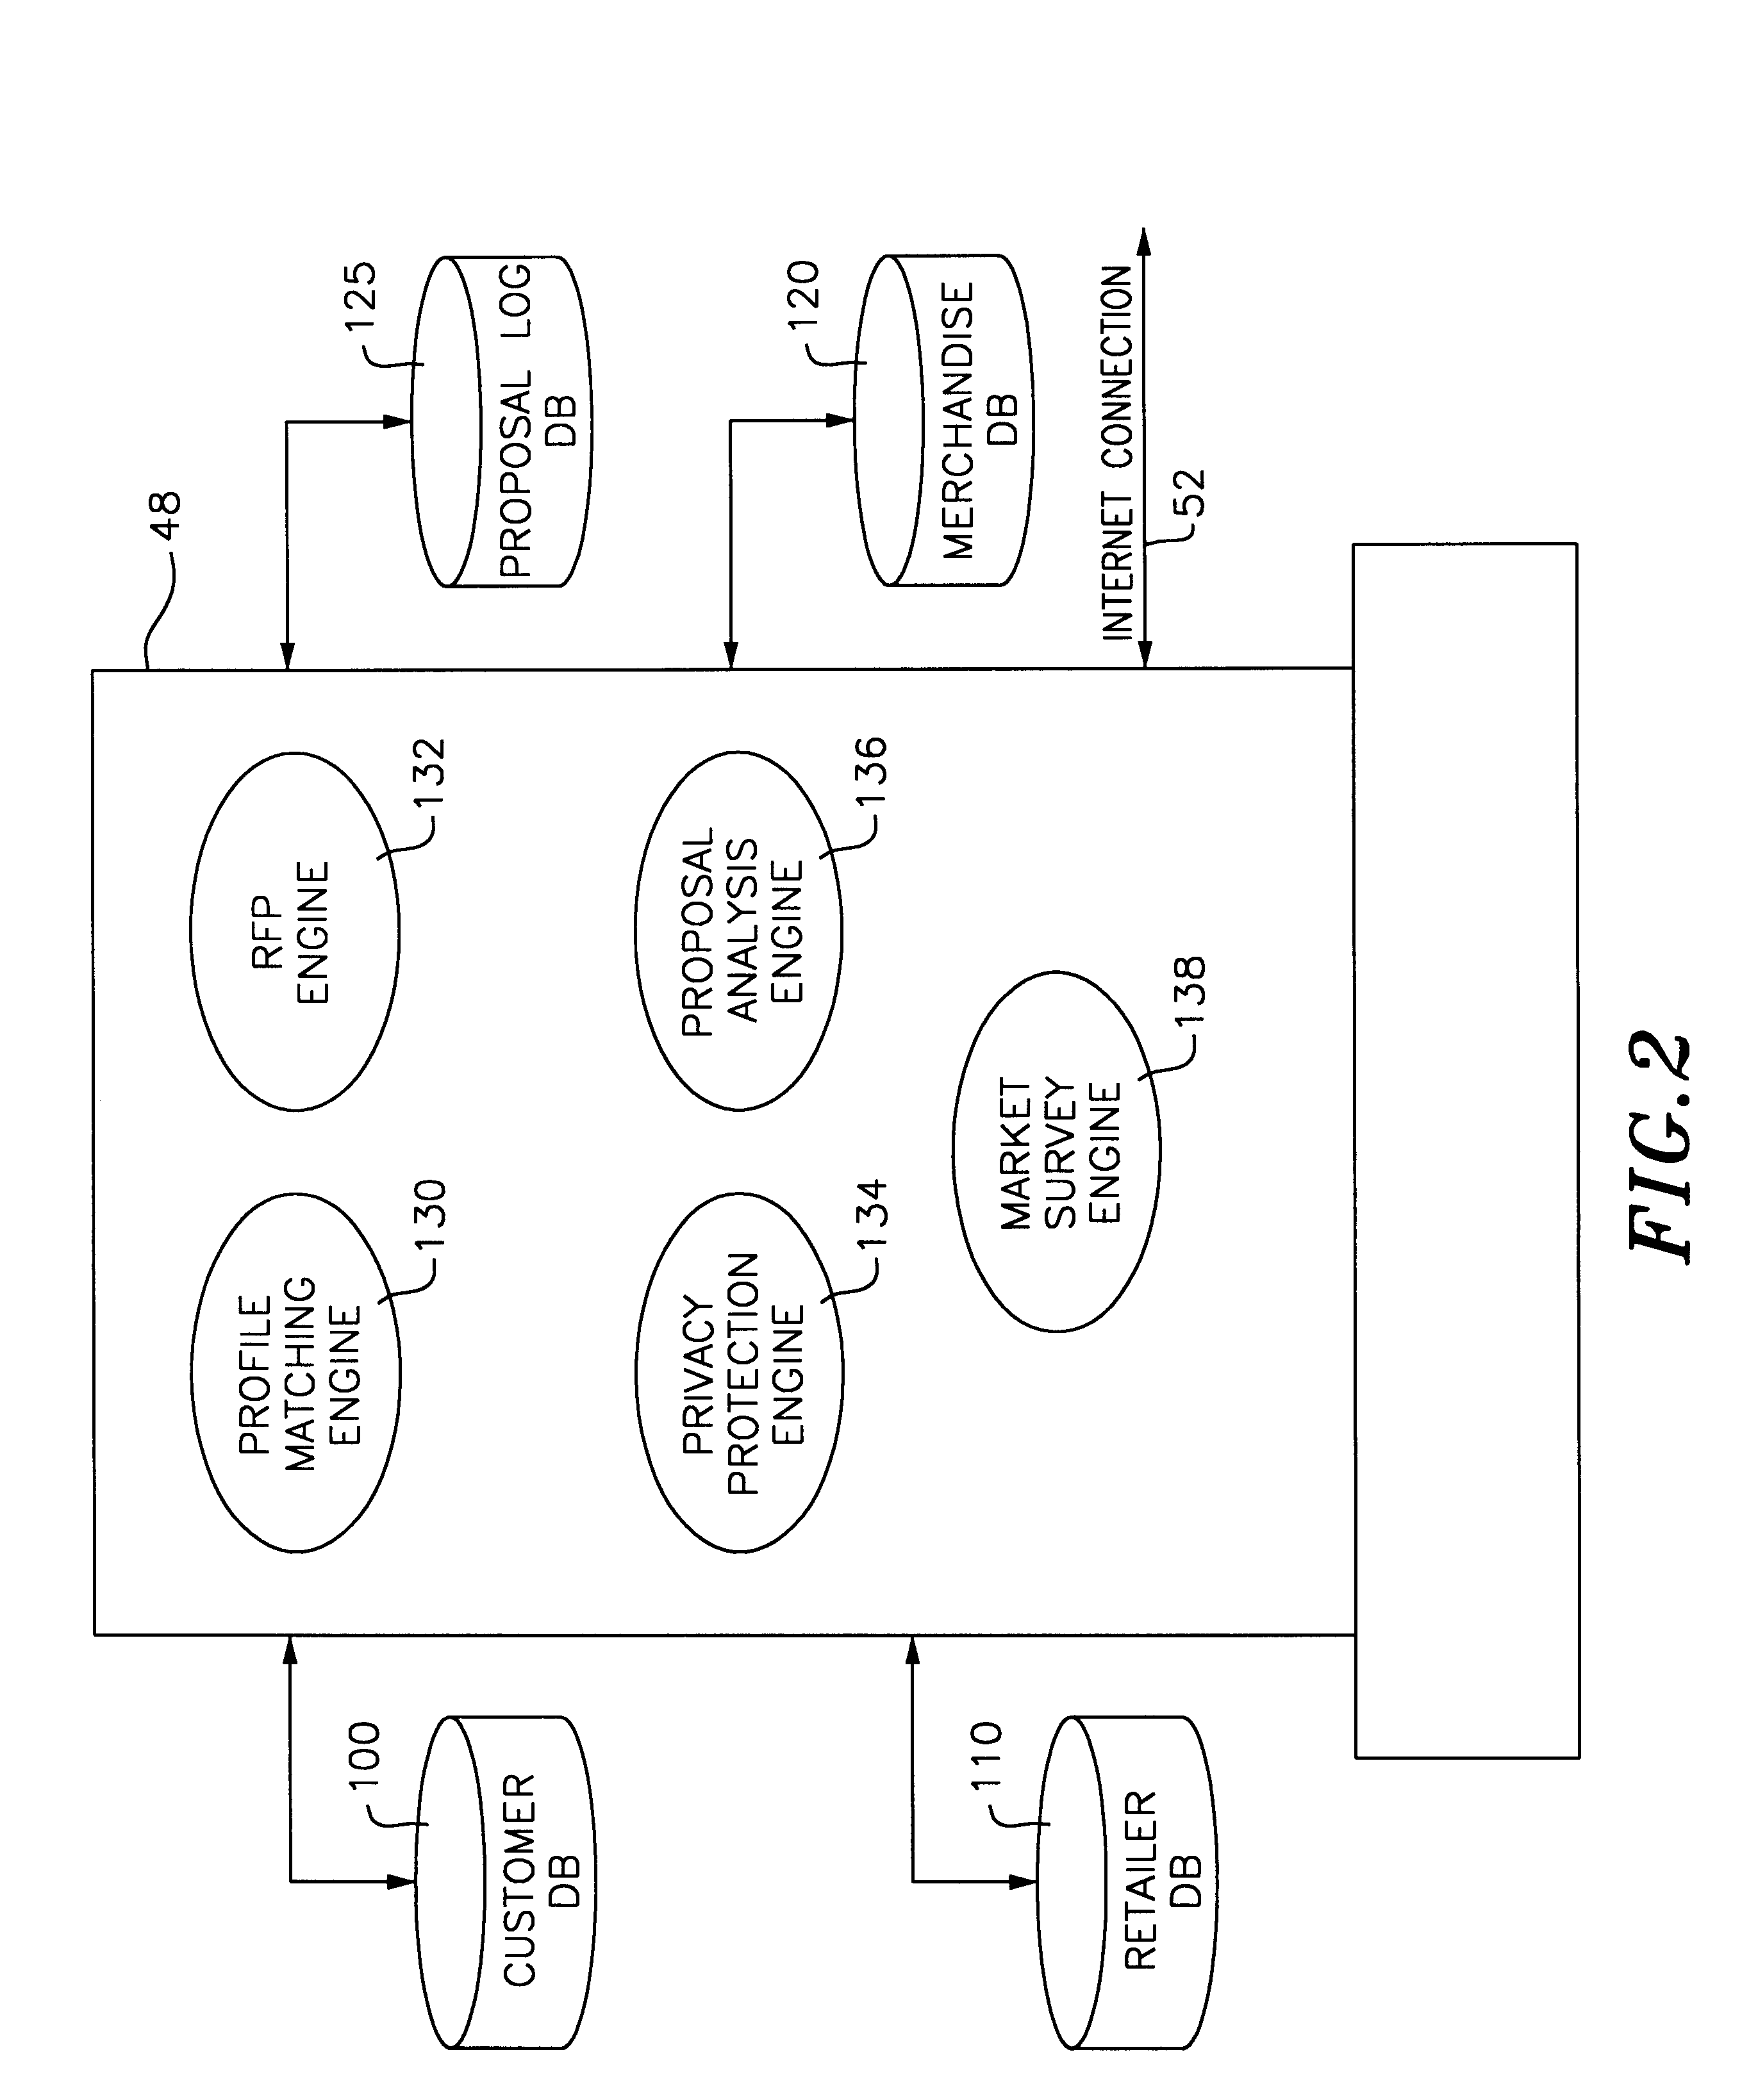 System and method for electronic shopping using an interactive shopping agent